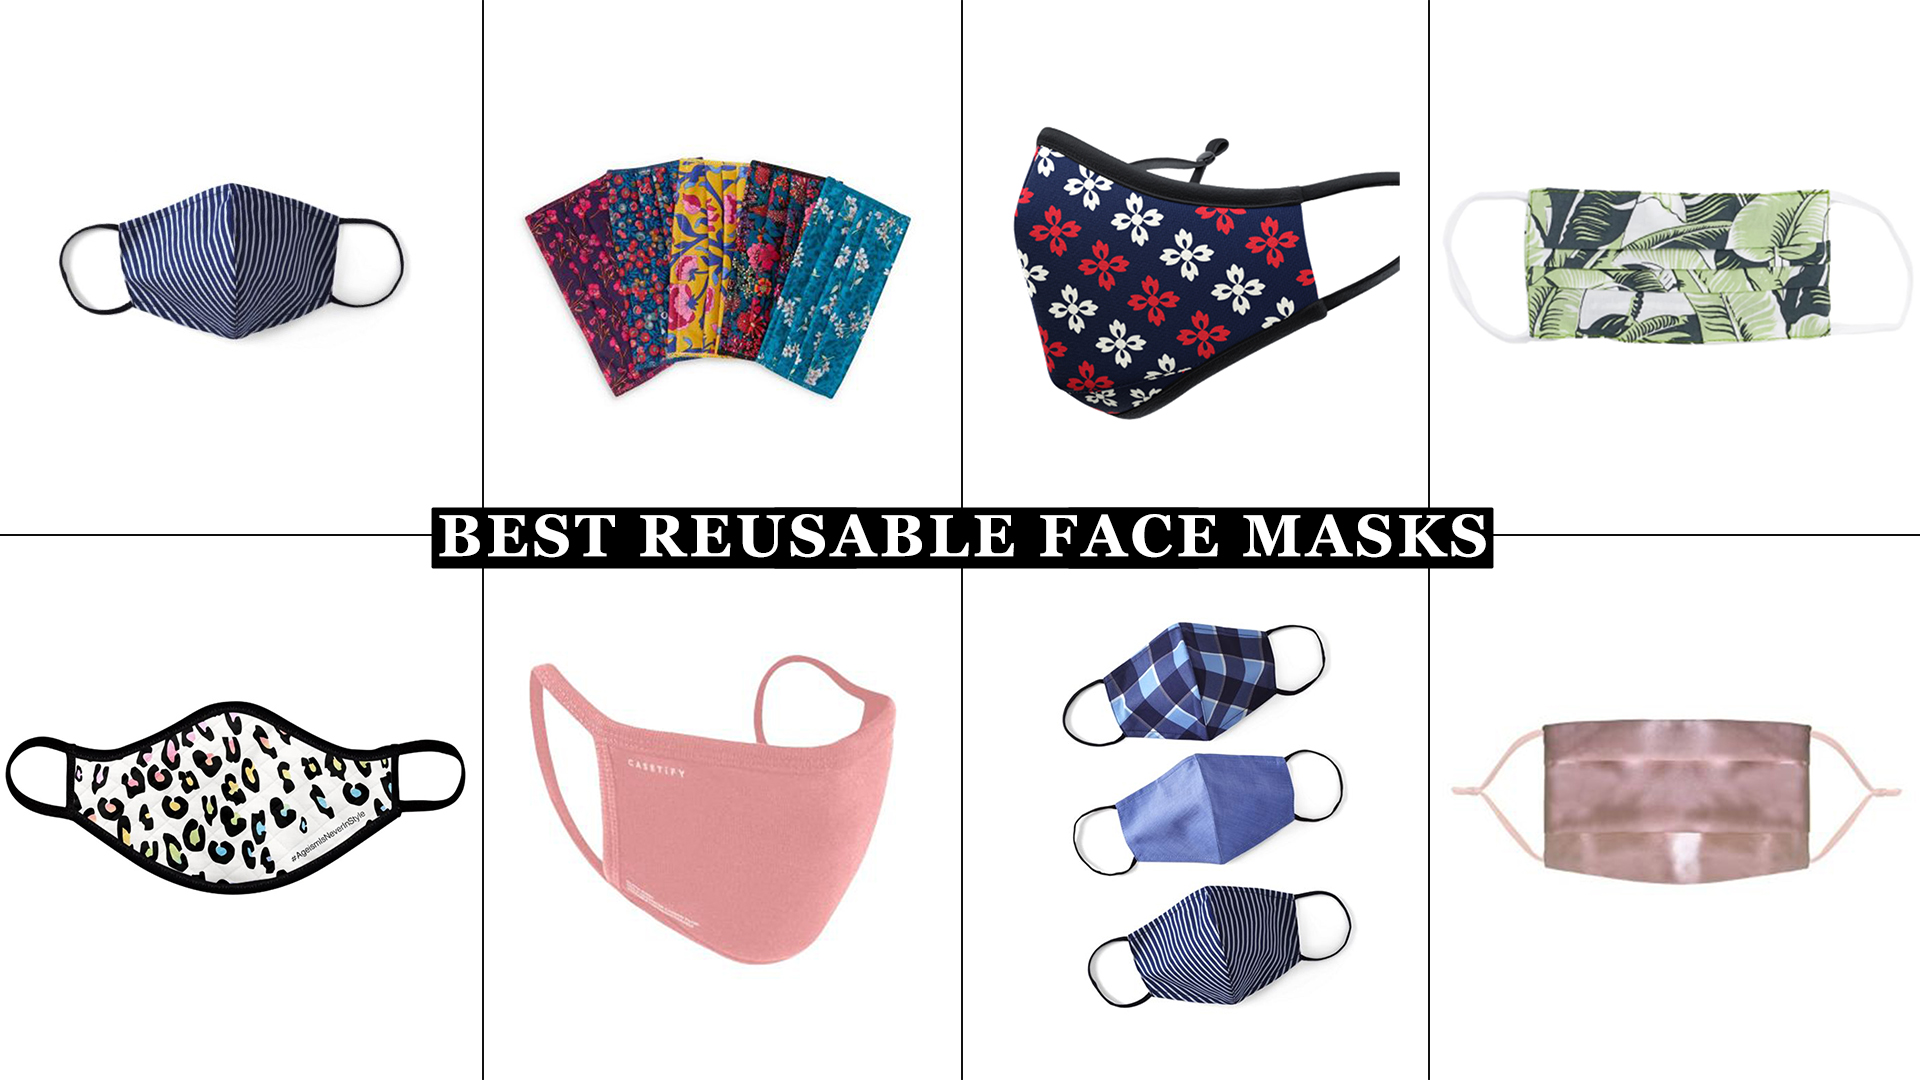 5PCS Face Covering Floral Lace Design Reusable Washable Cotton Blend Fabric Double Layer Comfortable with Elastic Ear Loops for Women Men, 